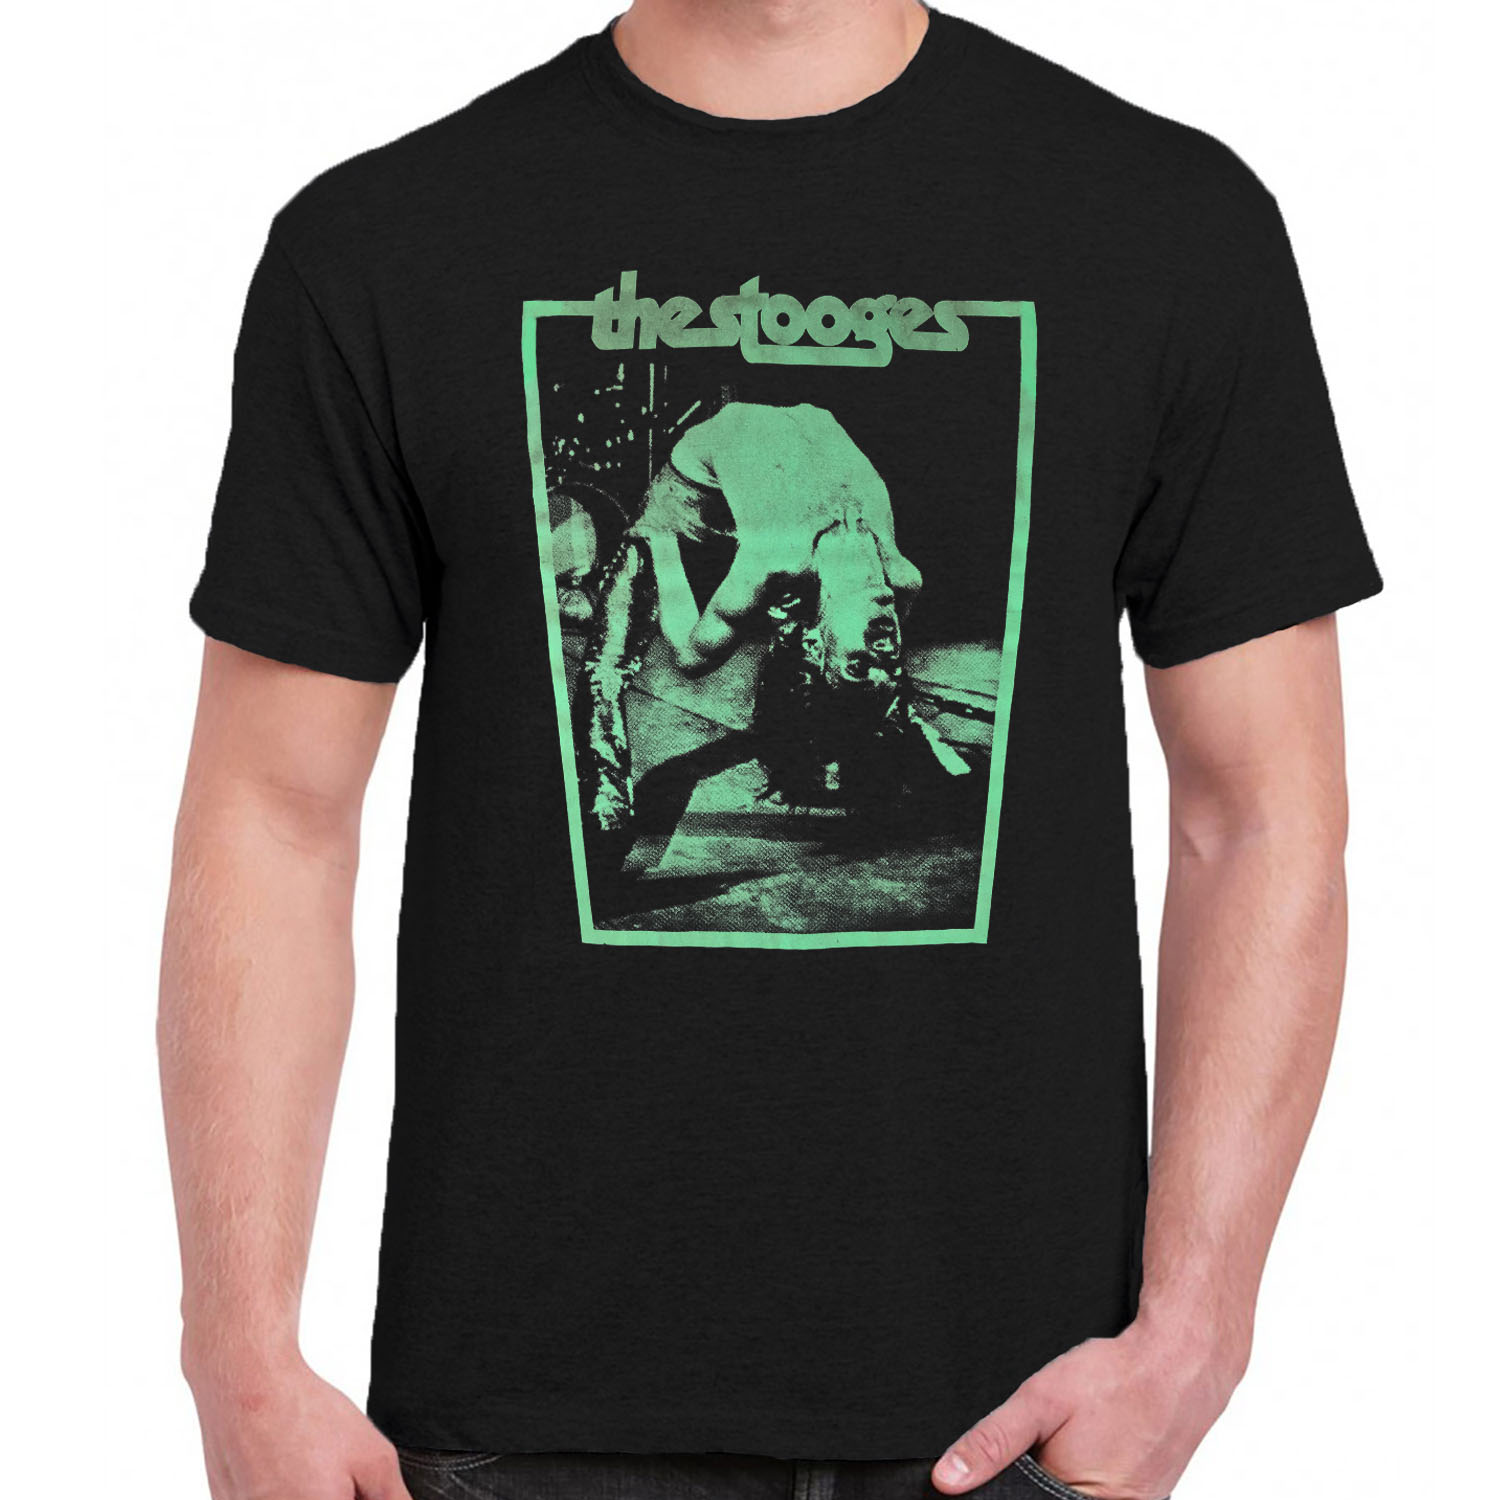 The Stooges t-shirt Iggy Pop the psychedelic